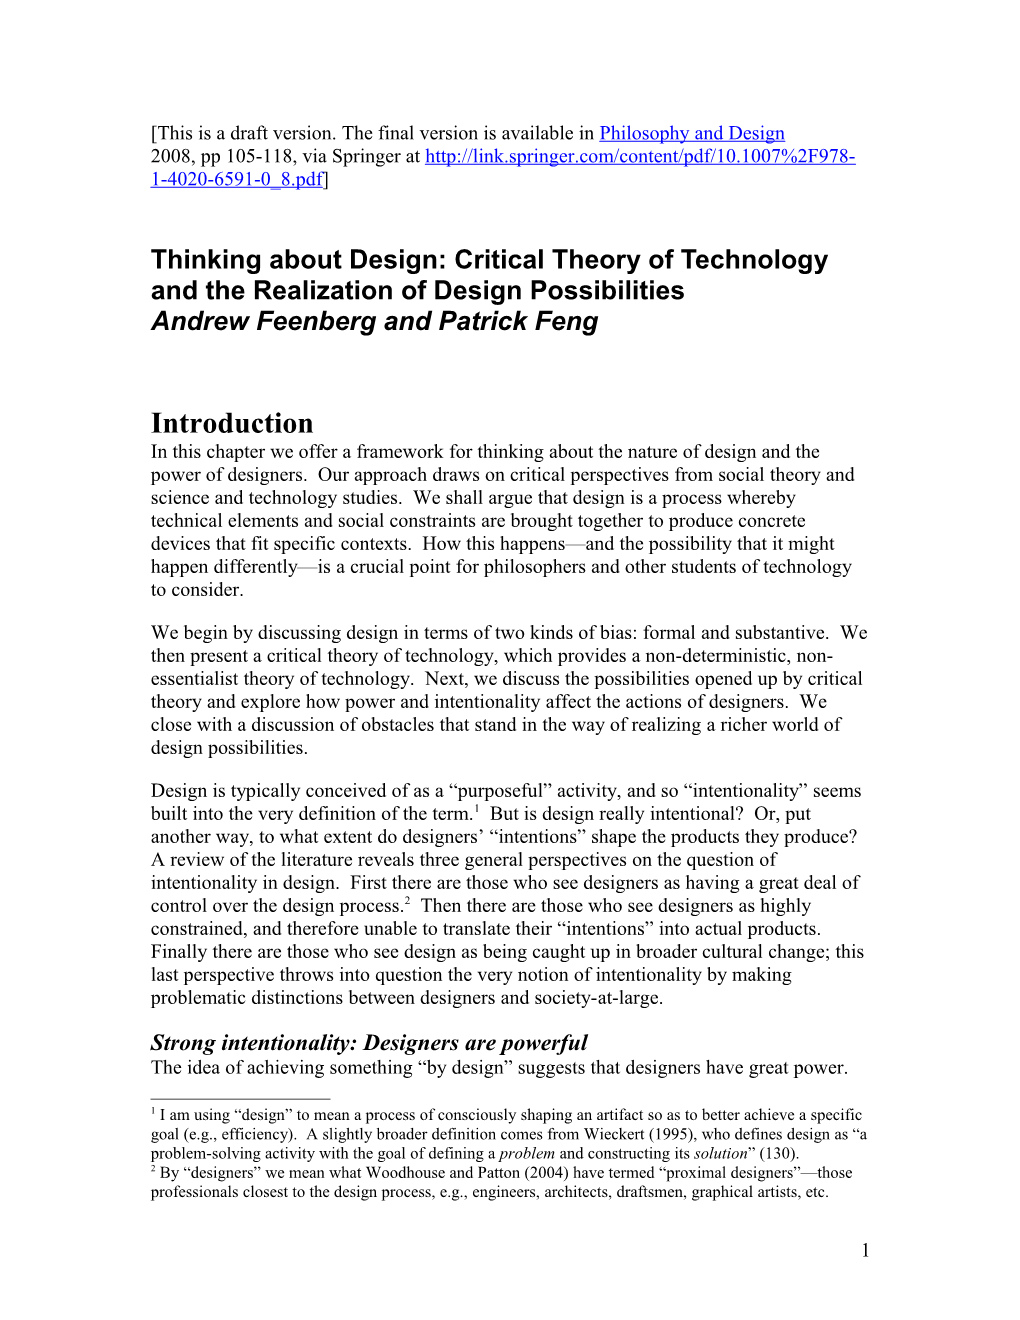 Thinking About Design: Critical Theory of Technology and the Realization of Design Possibilities